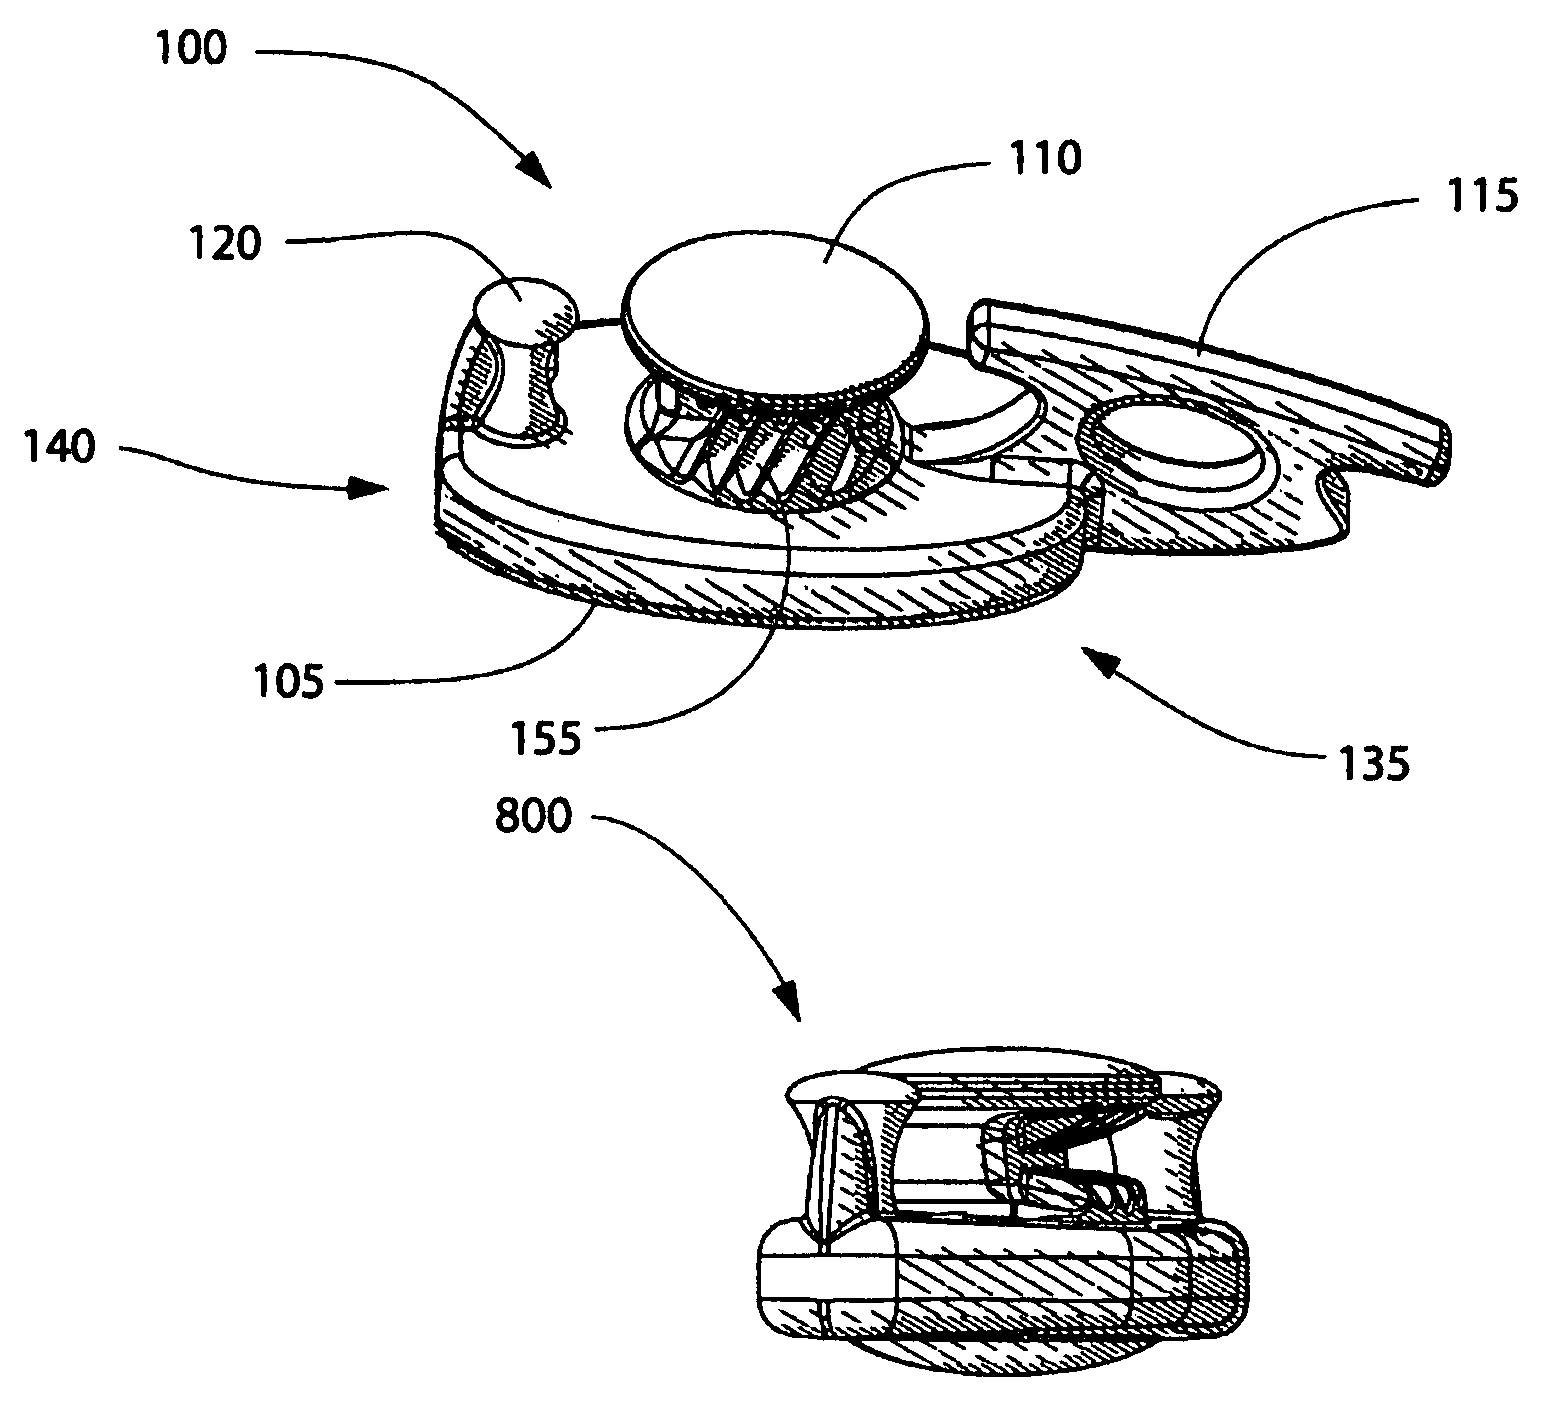 Device for quick fastening and tension adjustment of multiple cord configurations